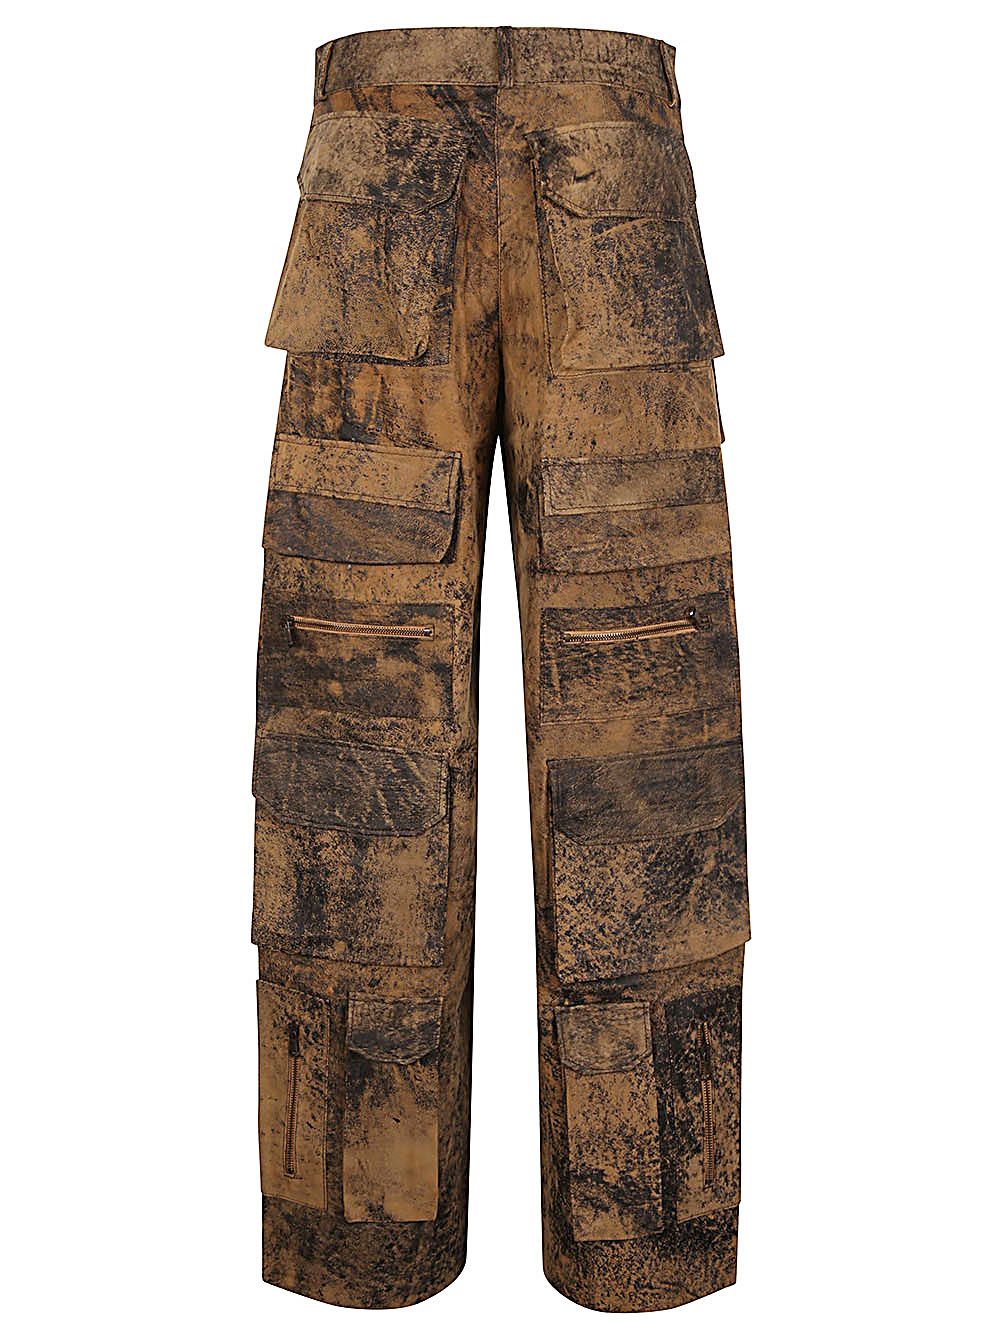 Stonebrown Leather Cargo Pants